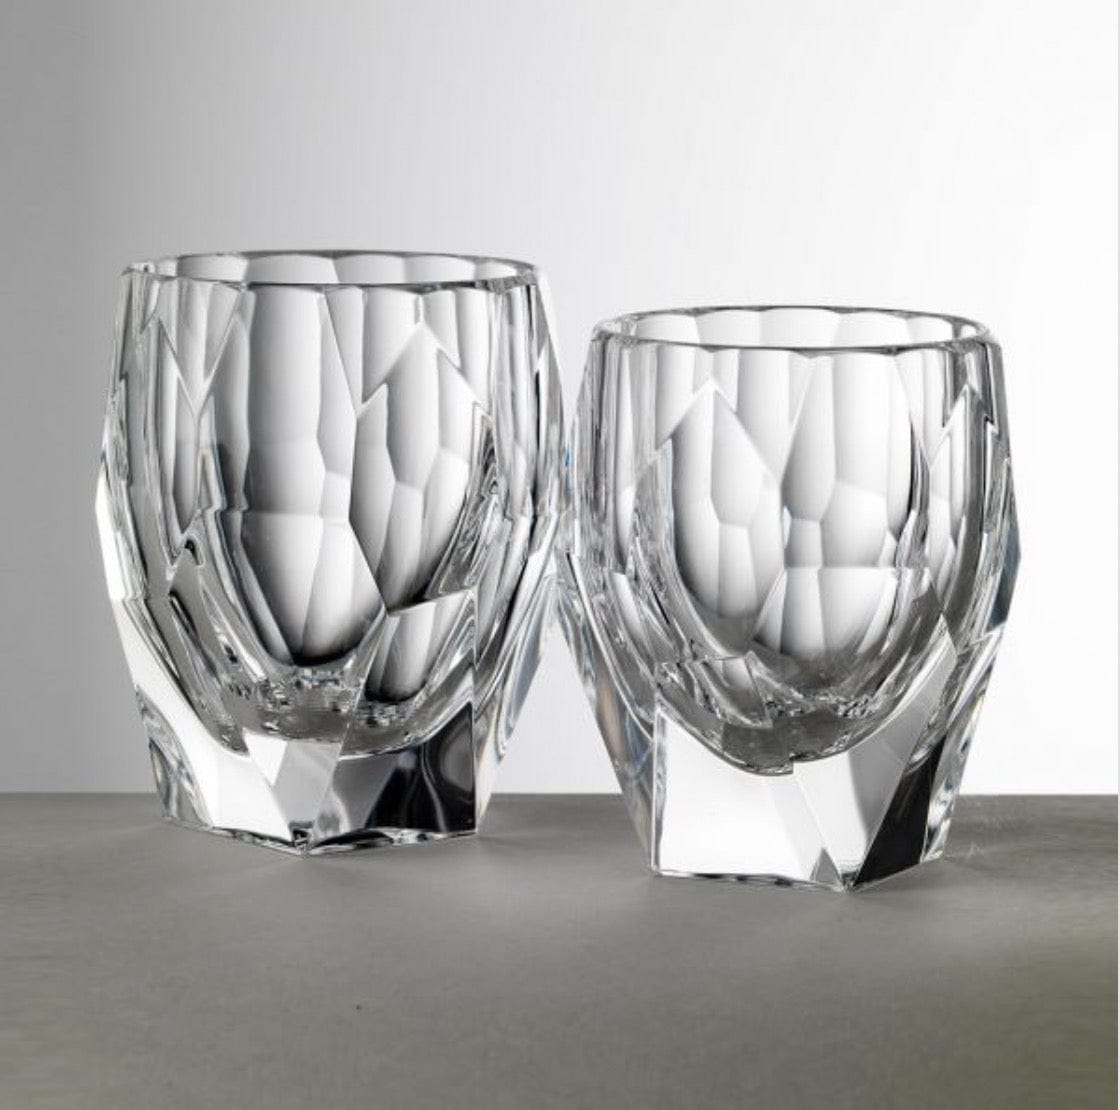 Mario Luca Giusti Super Milly Set of 2 Tumblers - Clear